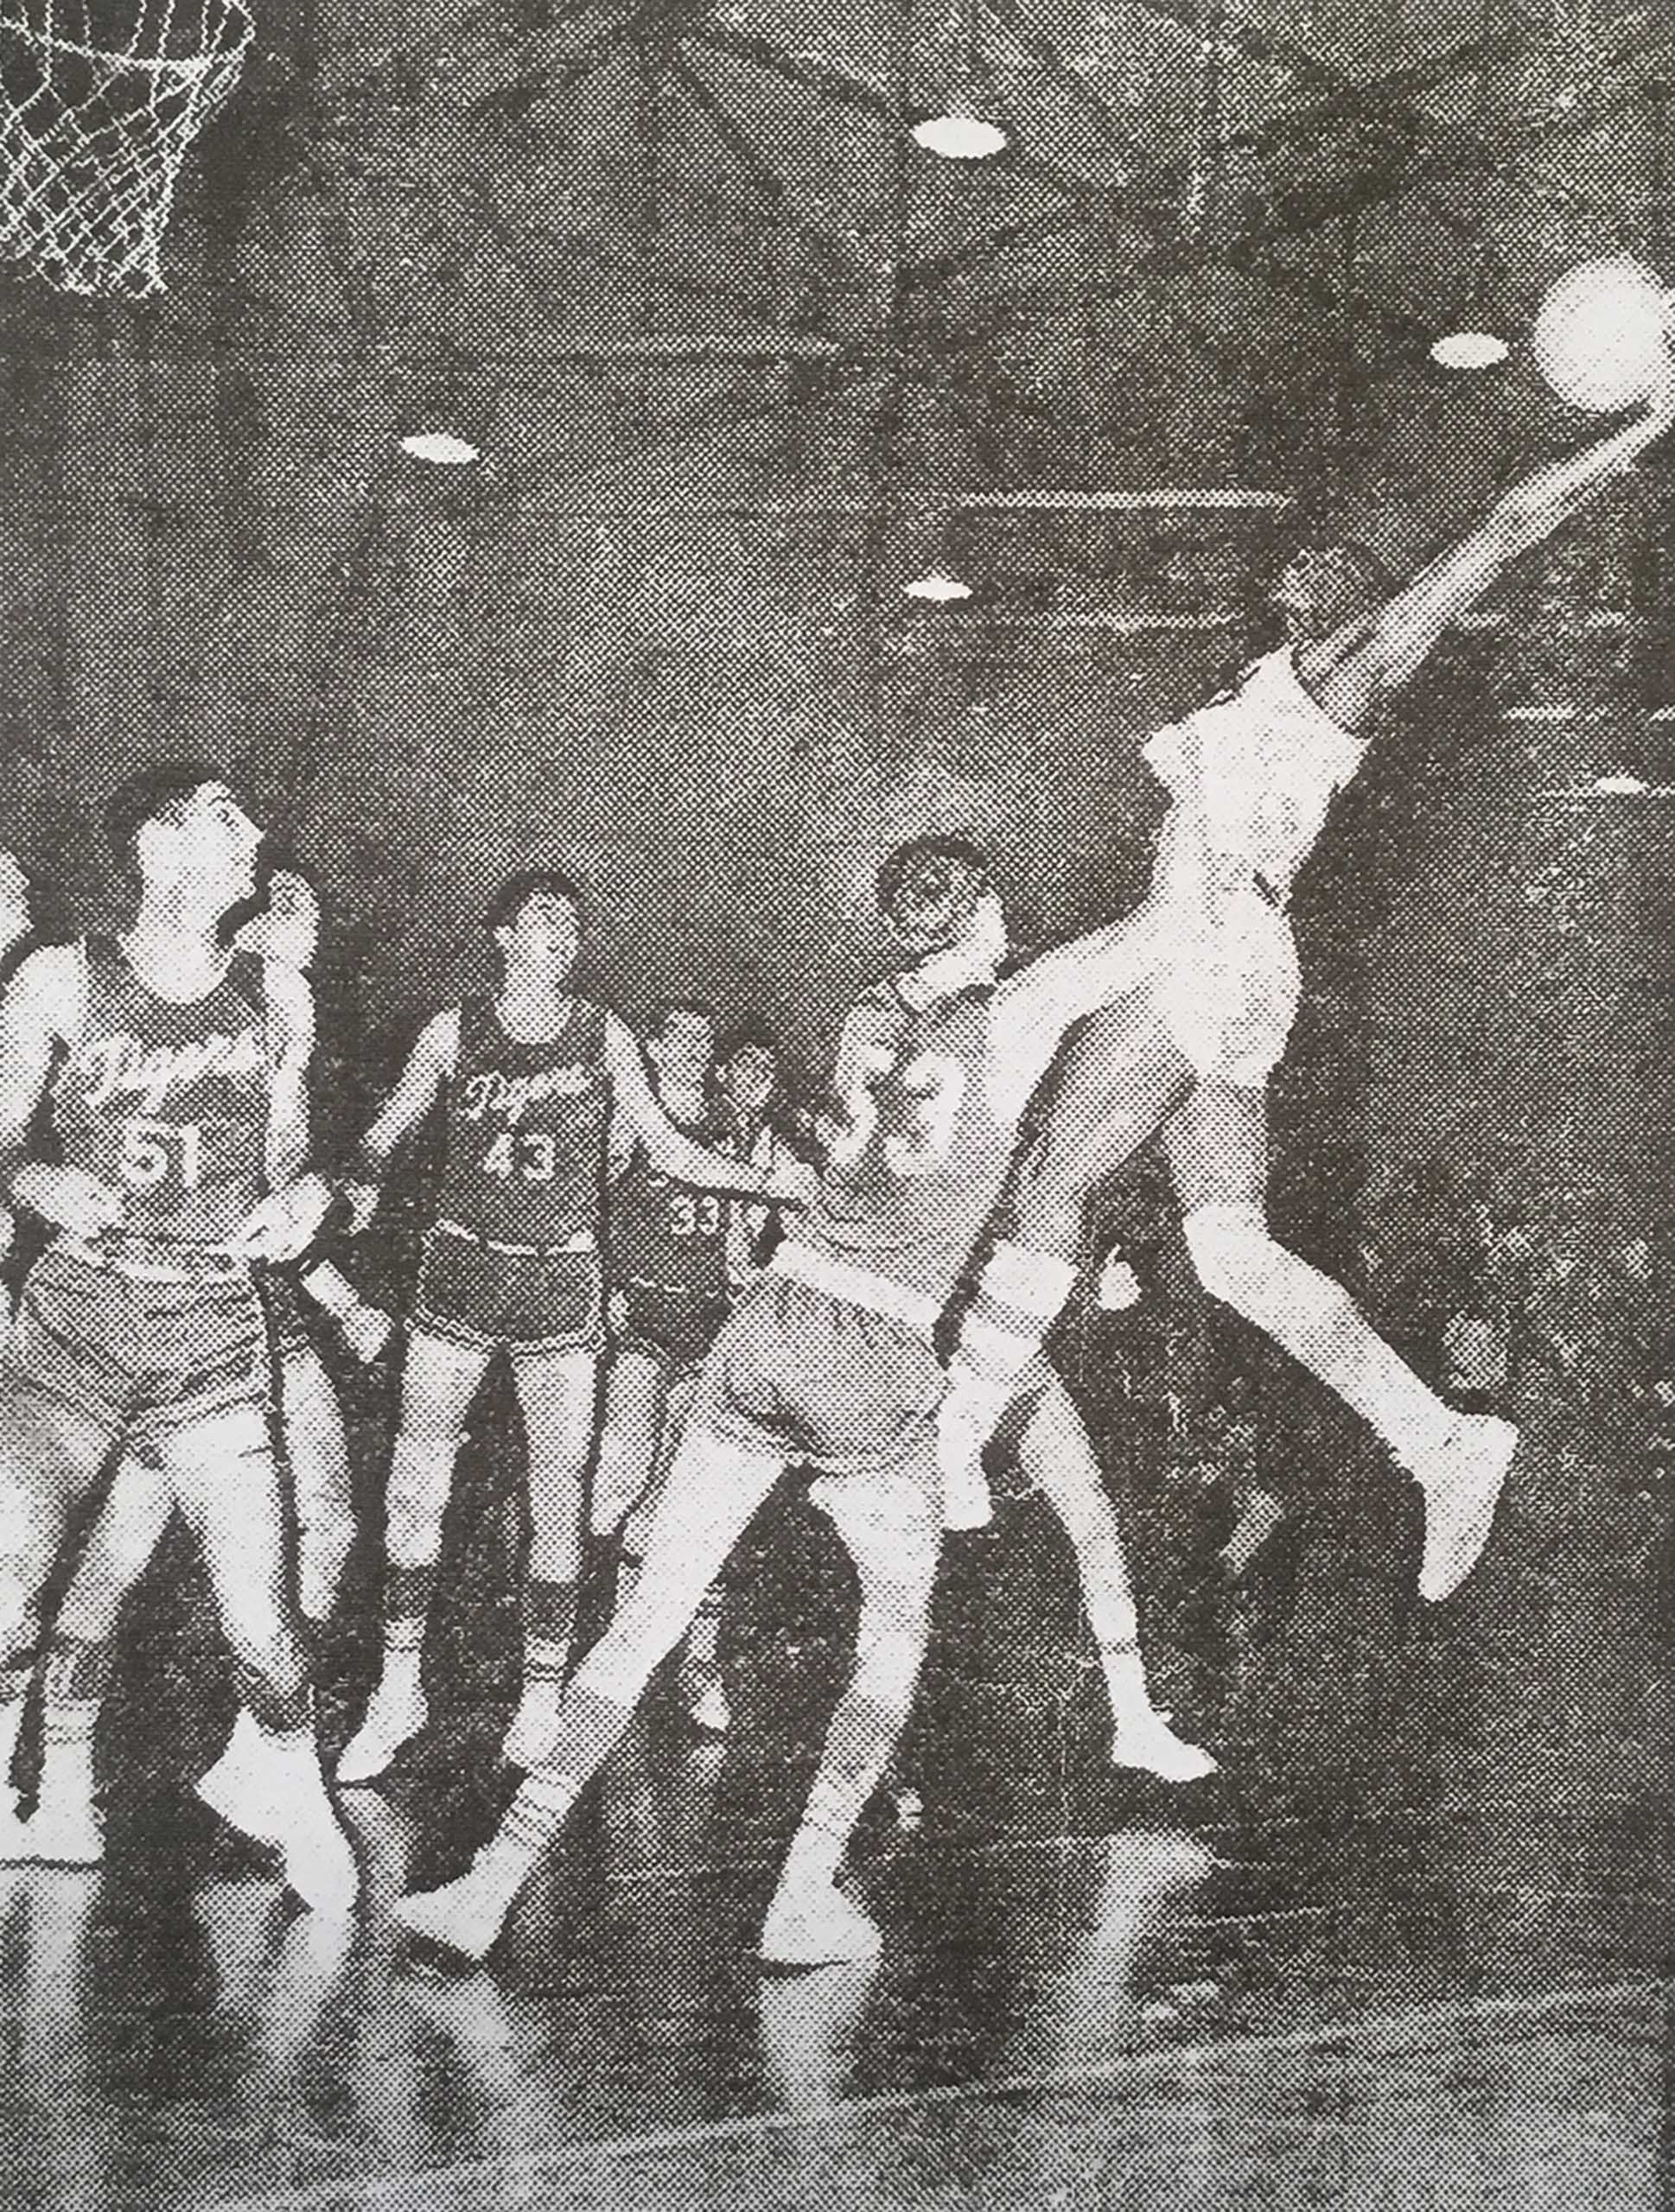 Black and white photo of a basketball game in Franklin Street Gym